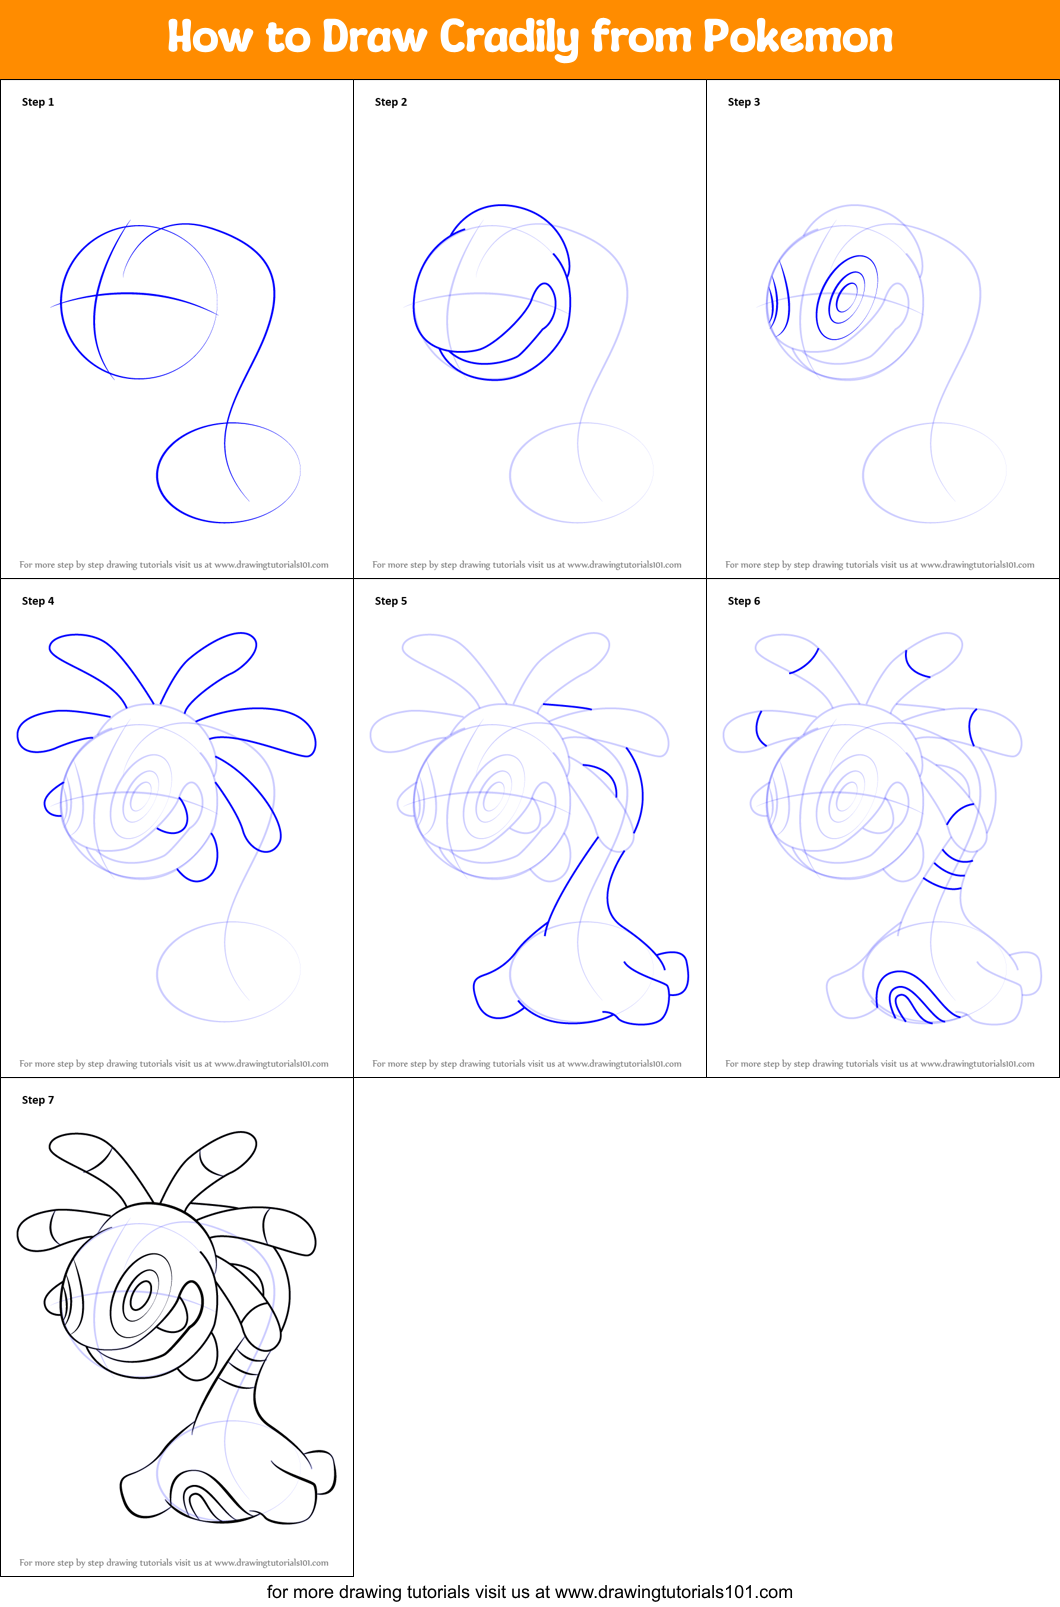 How to Draw Cradily from Pokemon printable step by step drawing sheet